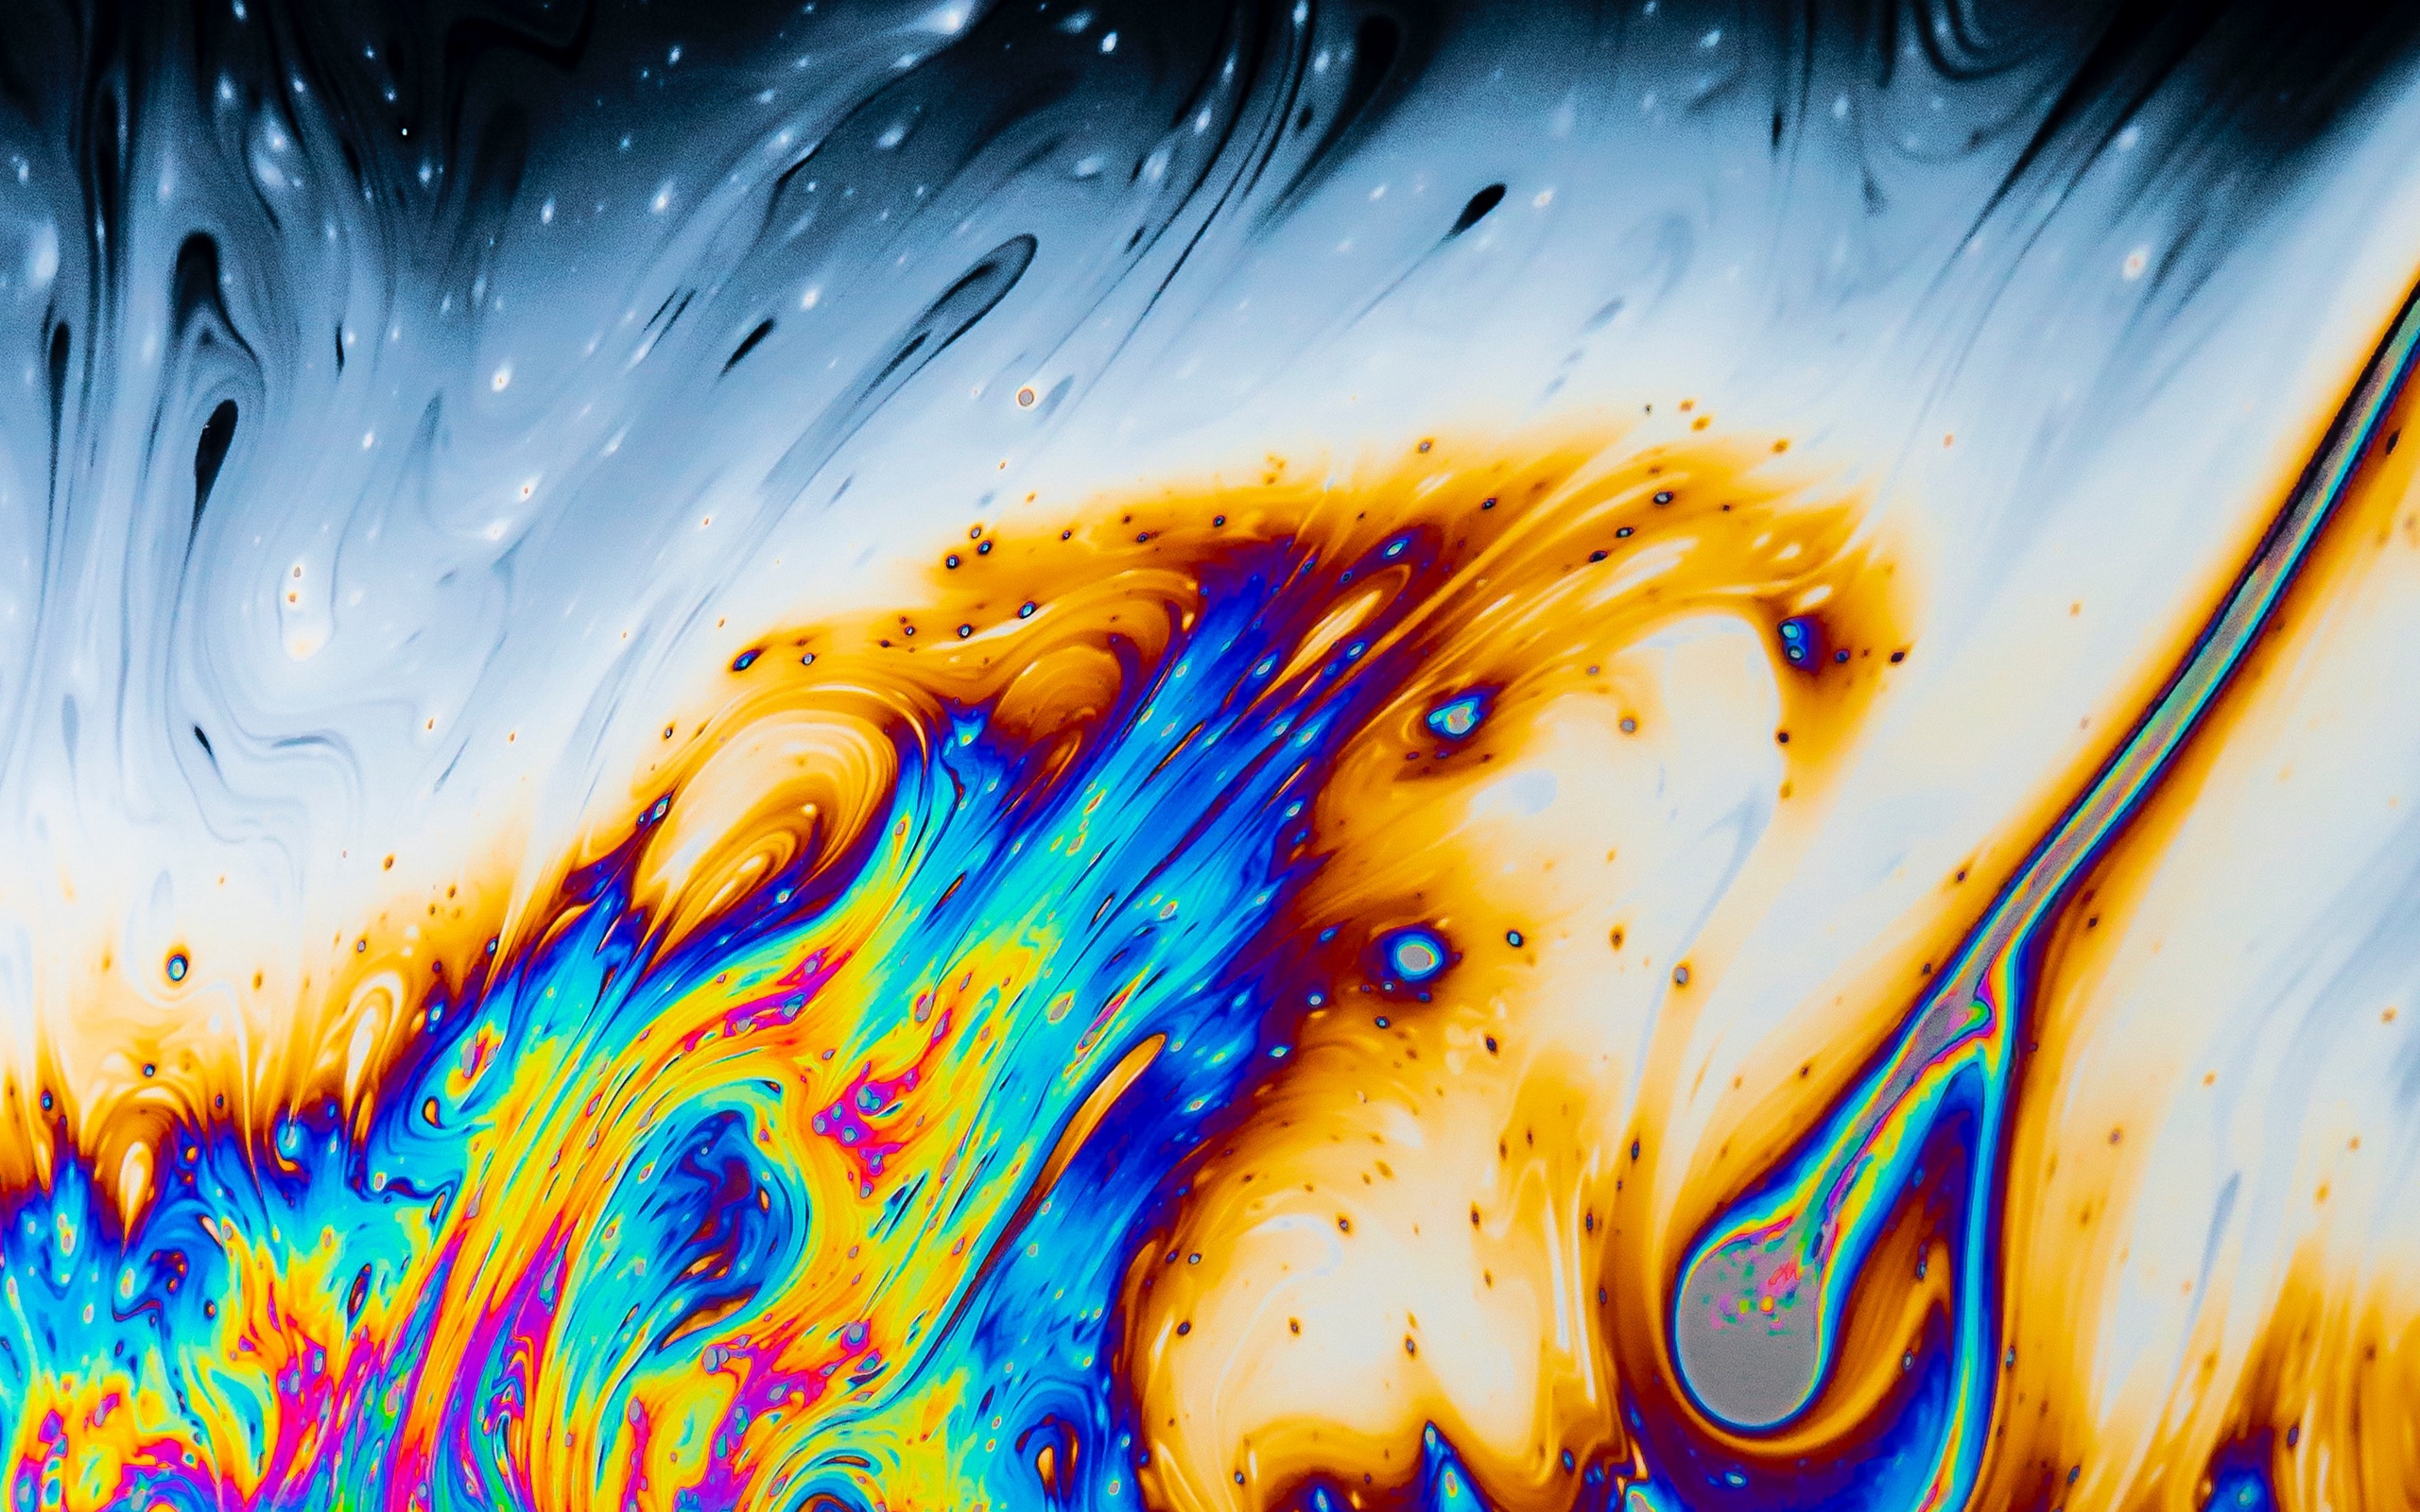 Download wallpaper 2560x1600 fluid stains lines spots colorful